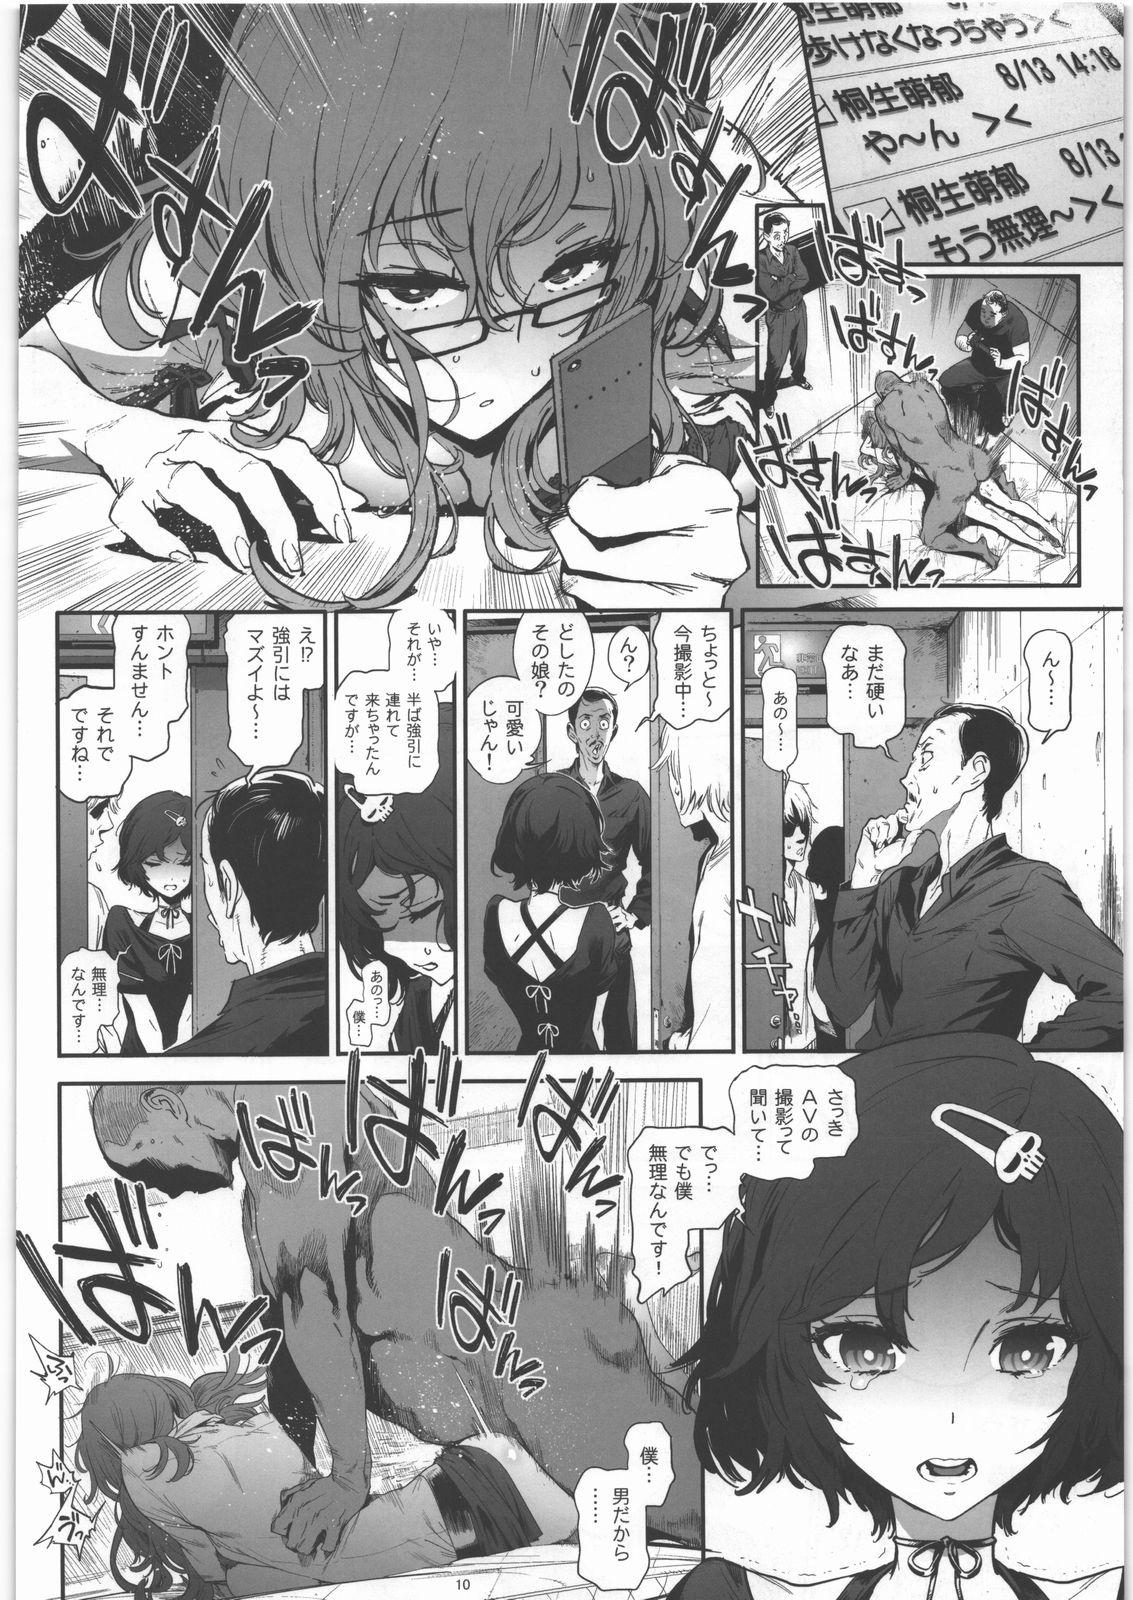 Game Moeka's Gate - Steinsgate Spreading - Page 9